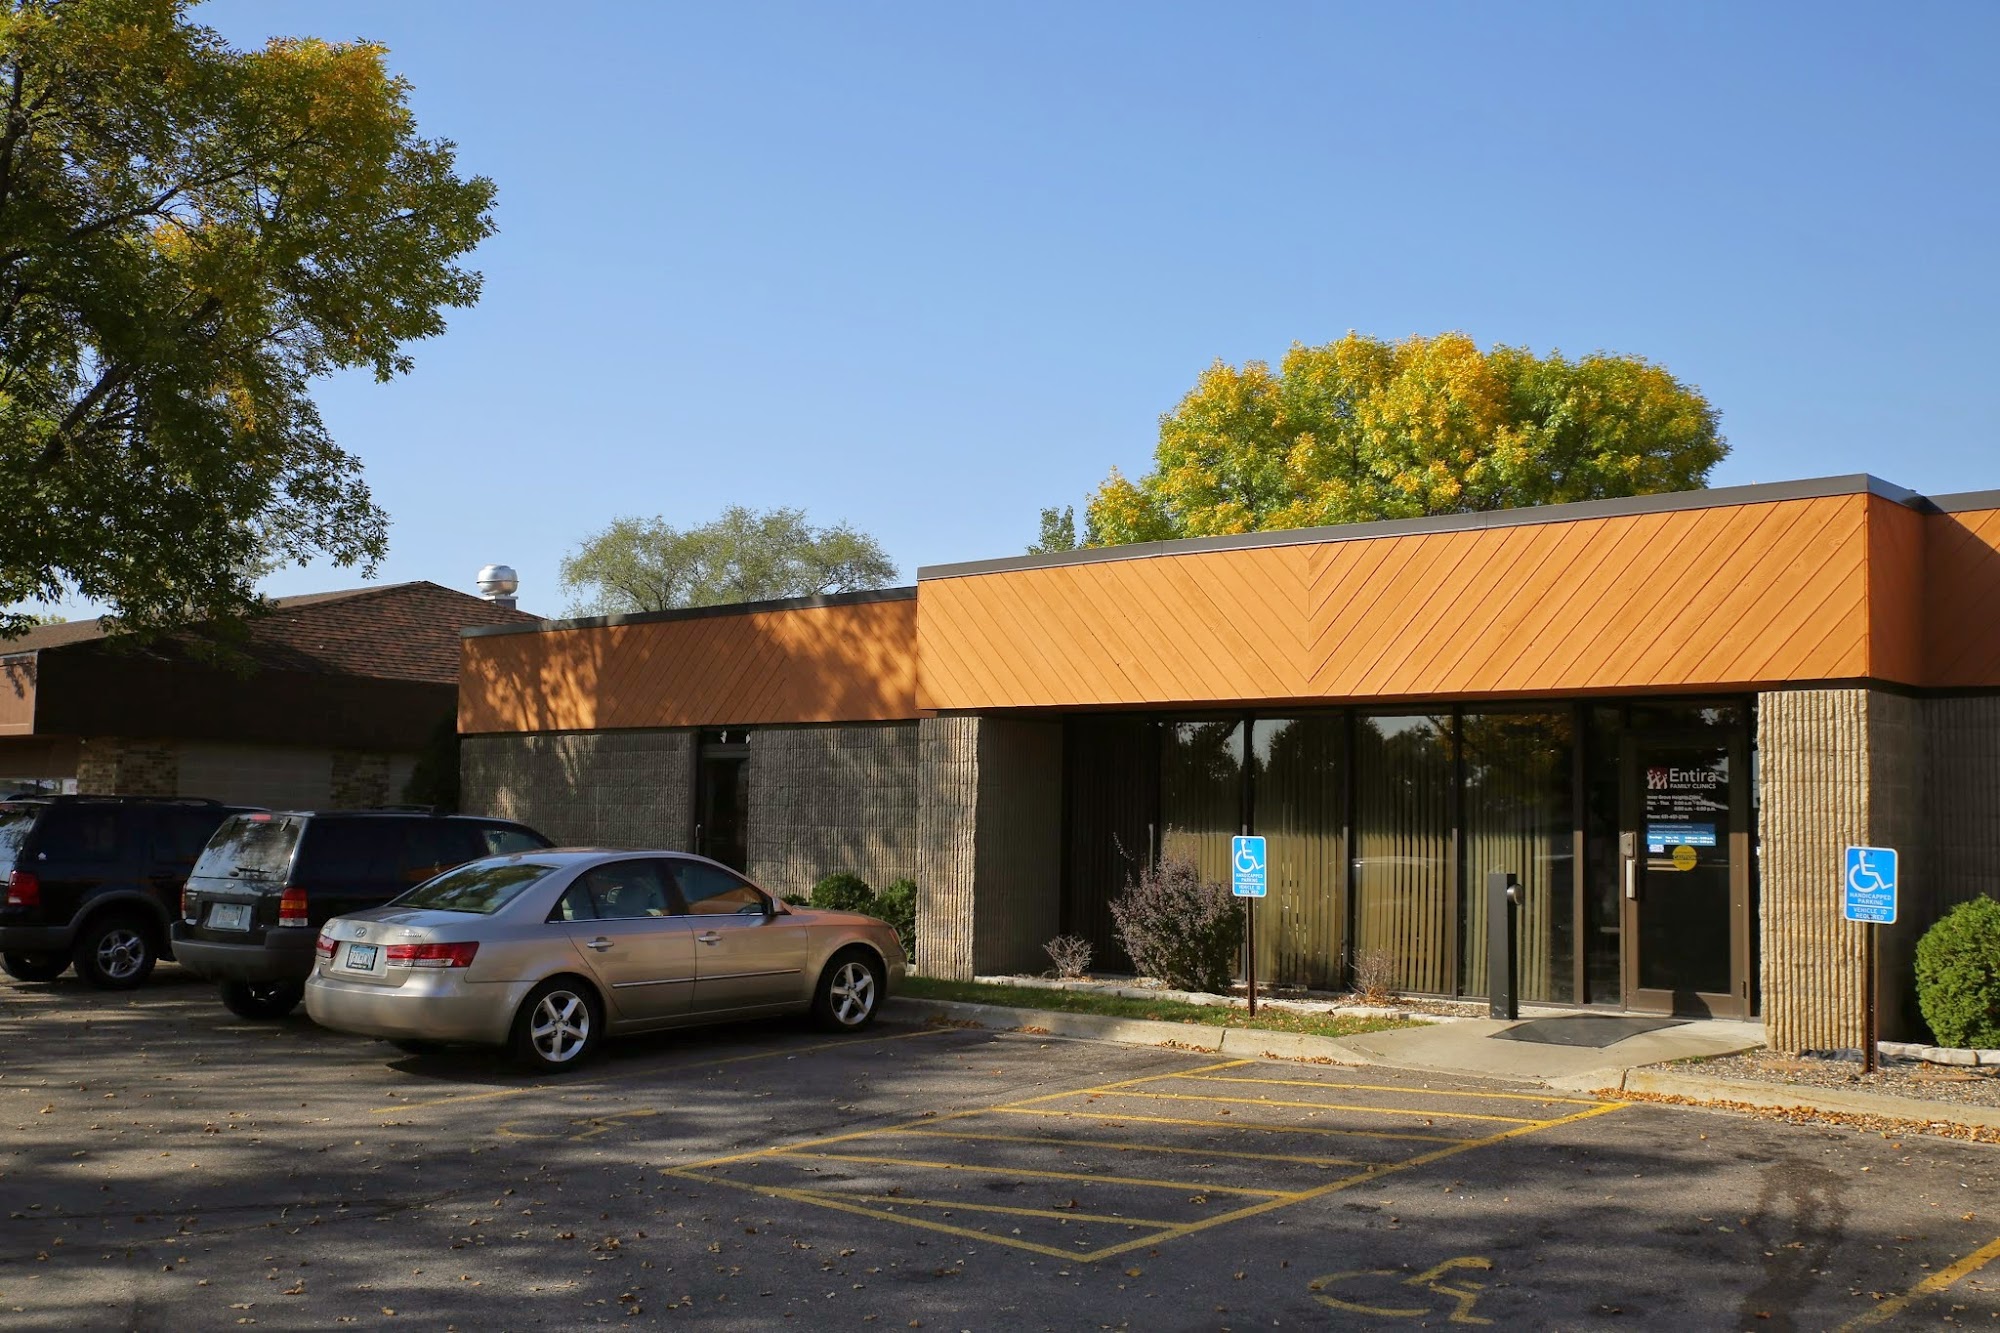 Entira Family Clinics - Inver Grove Heights